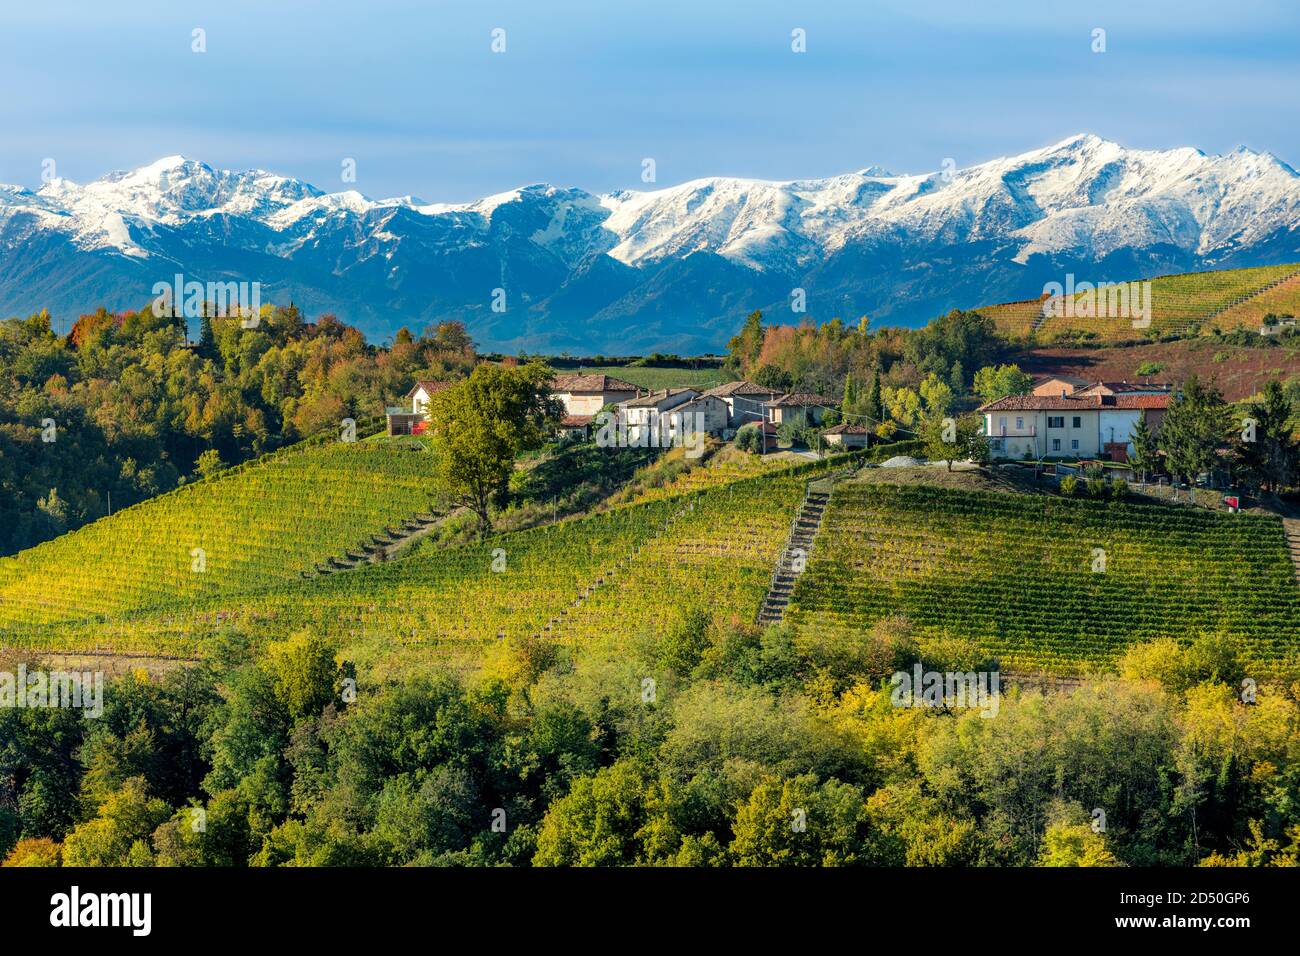 Villas and vineyards on a hillside near Serralunga d'Alba in the Langhe Region with the Maritime Alps beyond, Cuneo, Piemonte, Italy Stock Photo